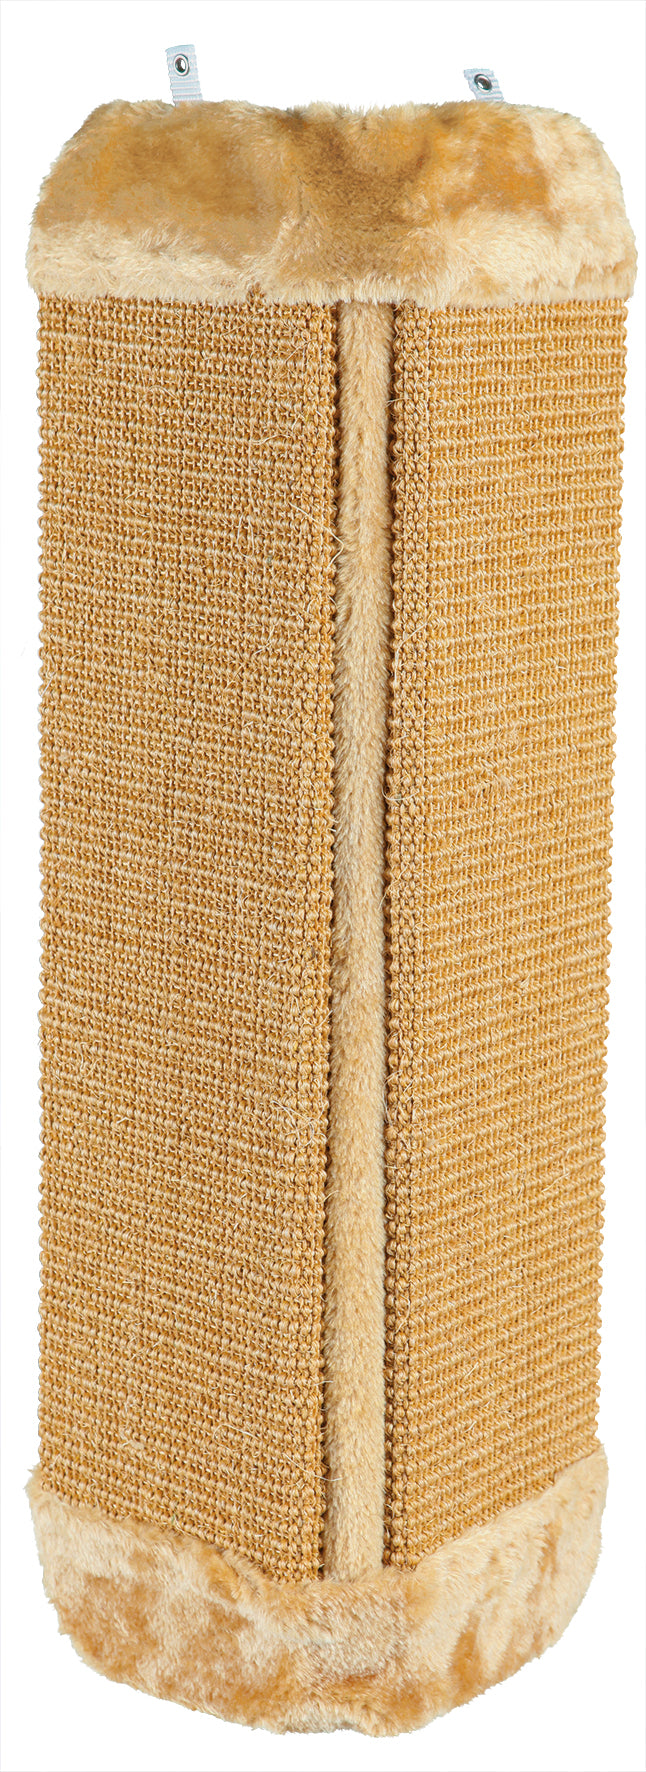 43431 Scratching board for corners, 32 x 60 cm, brown/brown